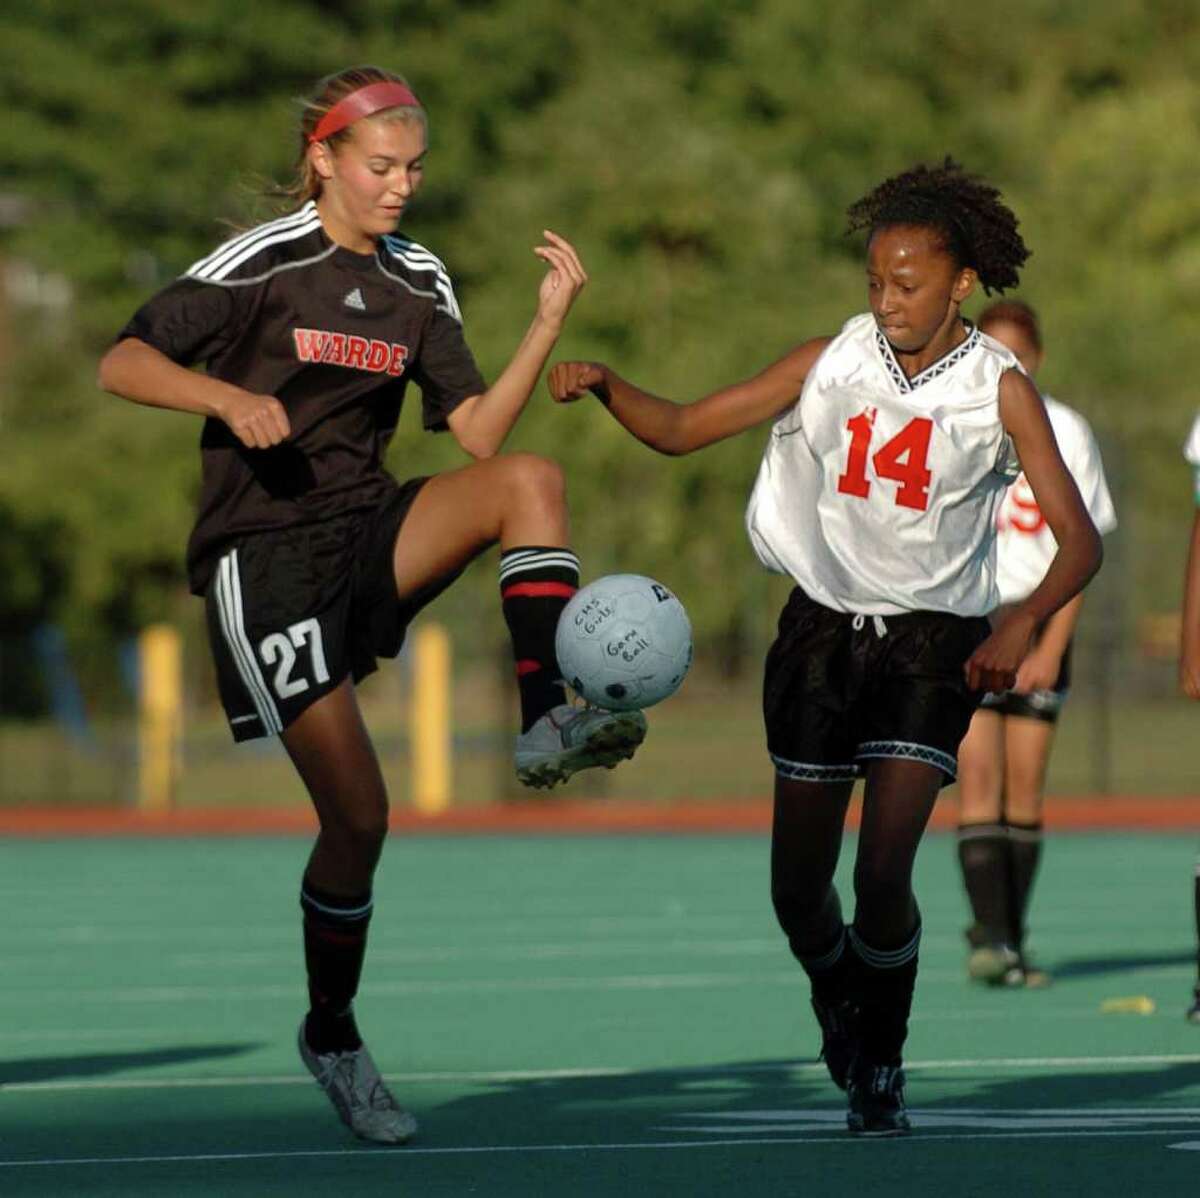 Fairfield Warde's #27 Elise Finzi, left, controls the ball as Central's #14 Amanda McKenzie comes in to intercept, during soccer action at Central High School in Bridgeport, Conn. on Tuesday September 21, 2010.